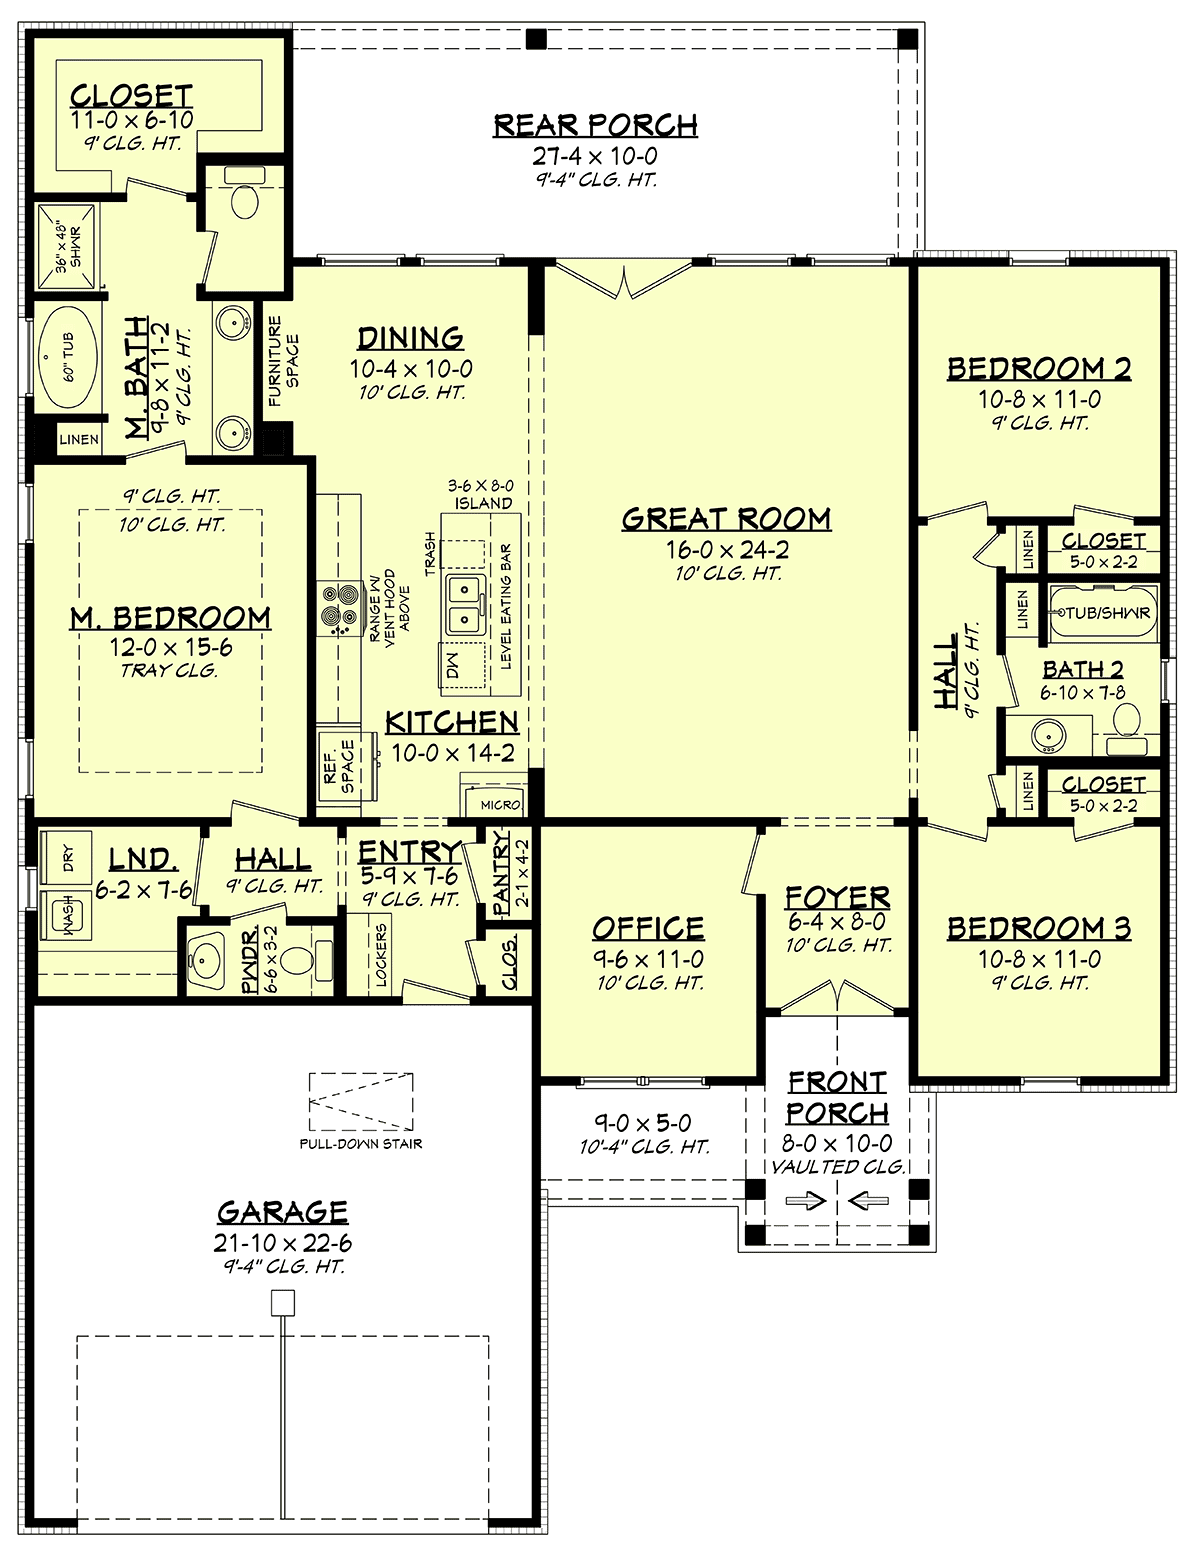 House Plan 80856 - Traditional Style with 1828 Sq Ft, 3 Bed, 2 Ba